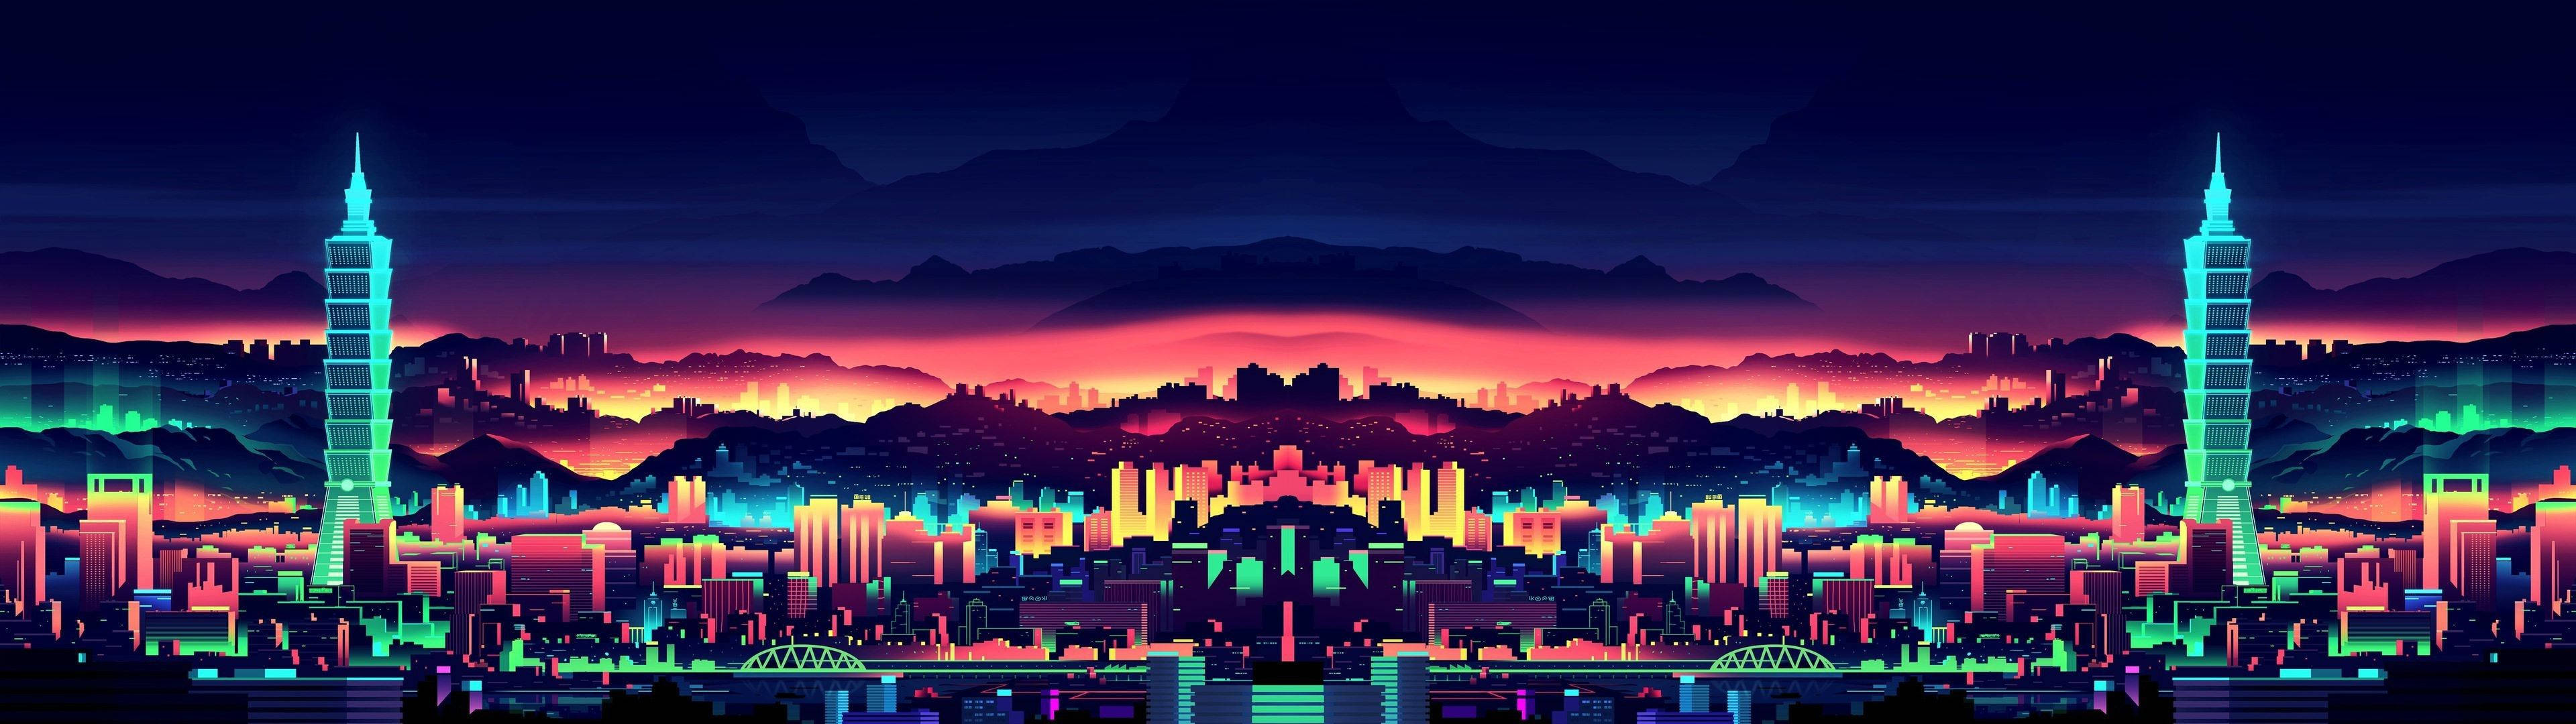 3840x1080 Hd Dual Monitor City Art Picture